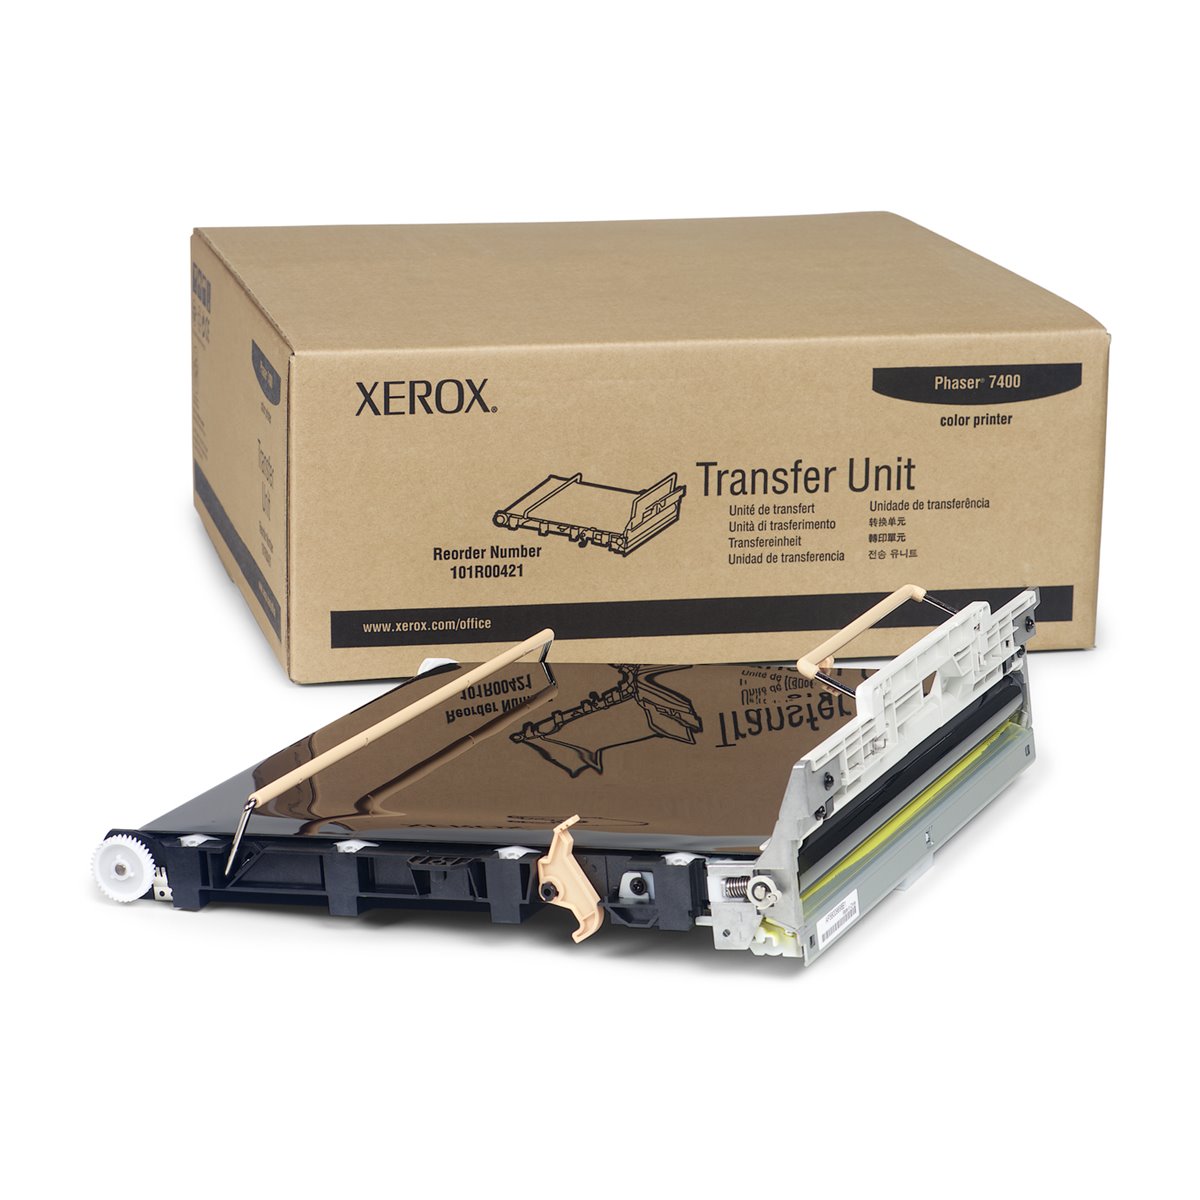 Xerox Transfer Belt (100,000 pages*) - 100000 pages - Black - White - Phaser 7400 - Japan - 480 x 460 x 200 mm - 1 pc(s)